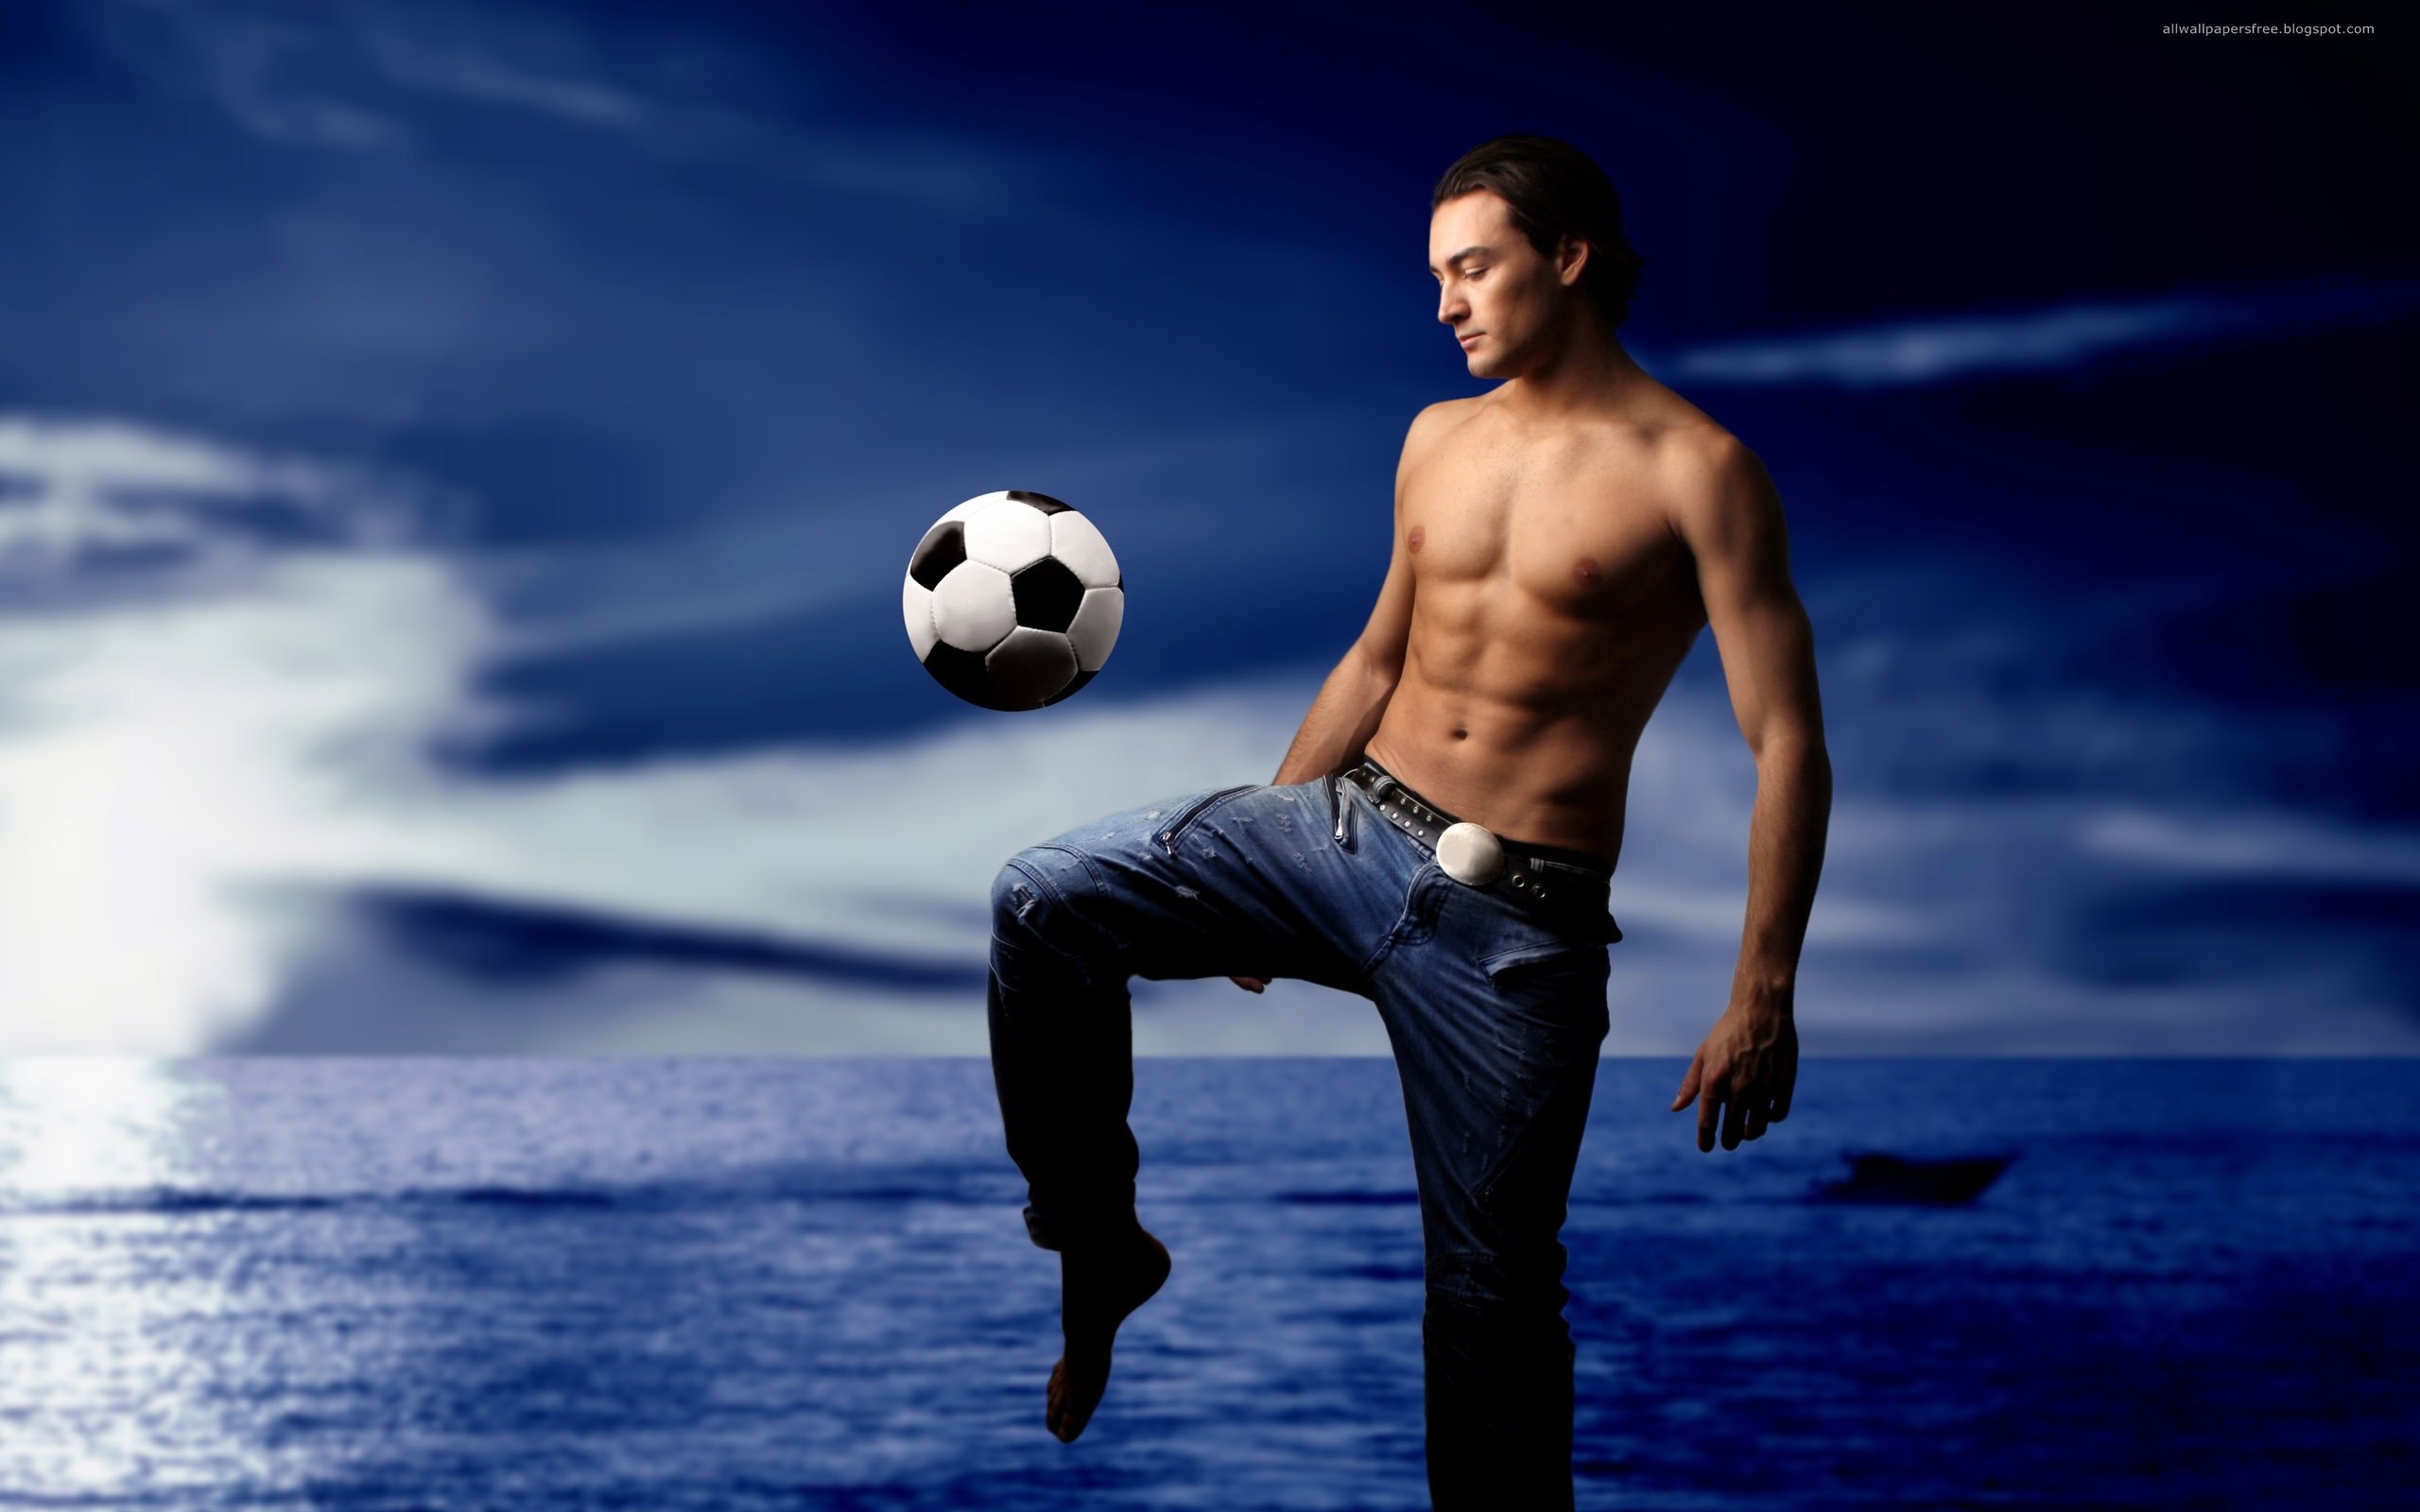 Image Sexy football player wallpapers and stock photos